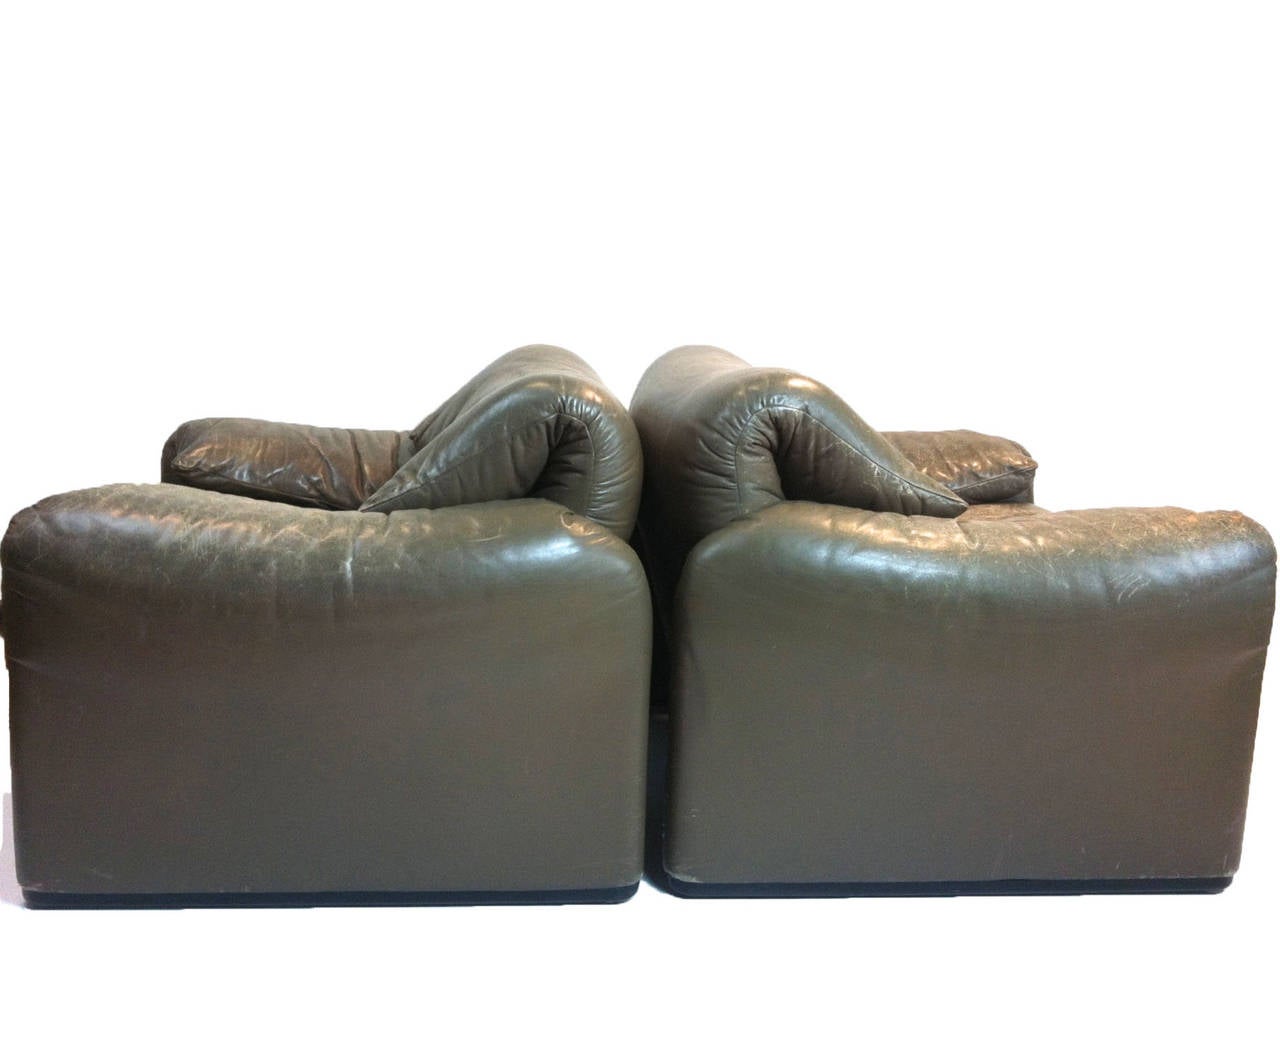 Mid-Century Modern Pair of Lounge Chairs with Ottoman by Vico Magistretti for Cassina